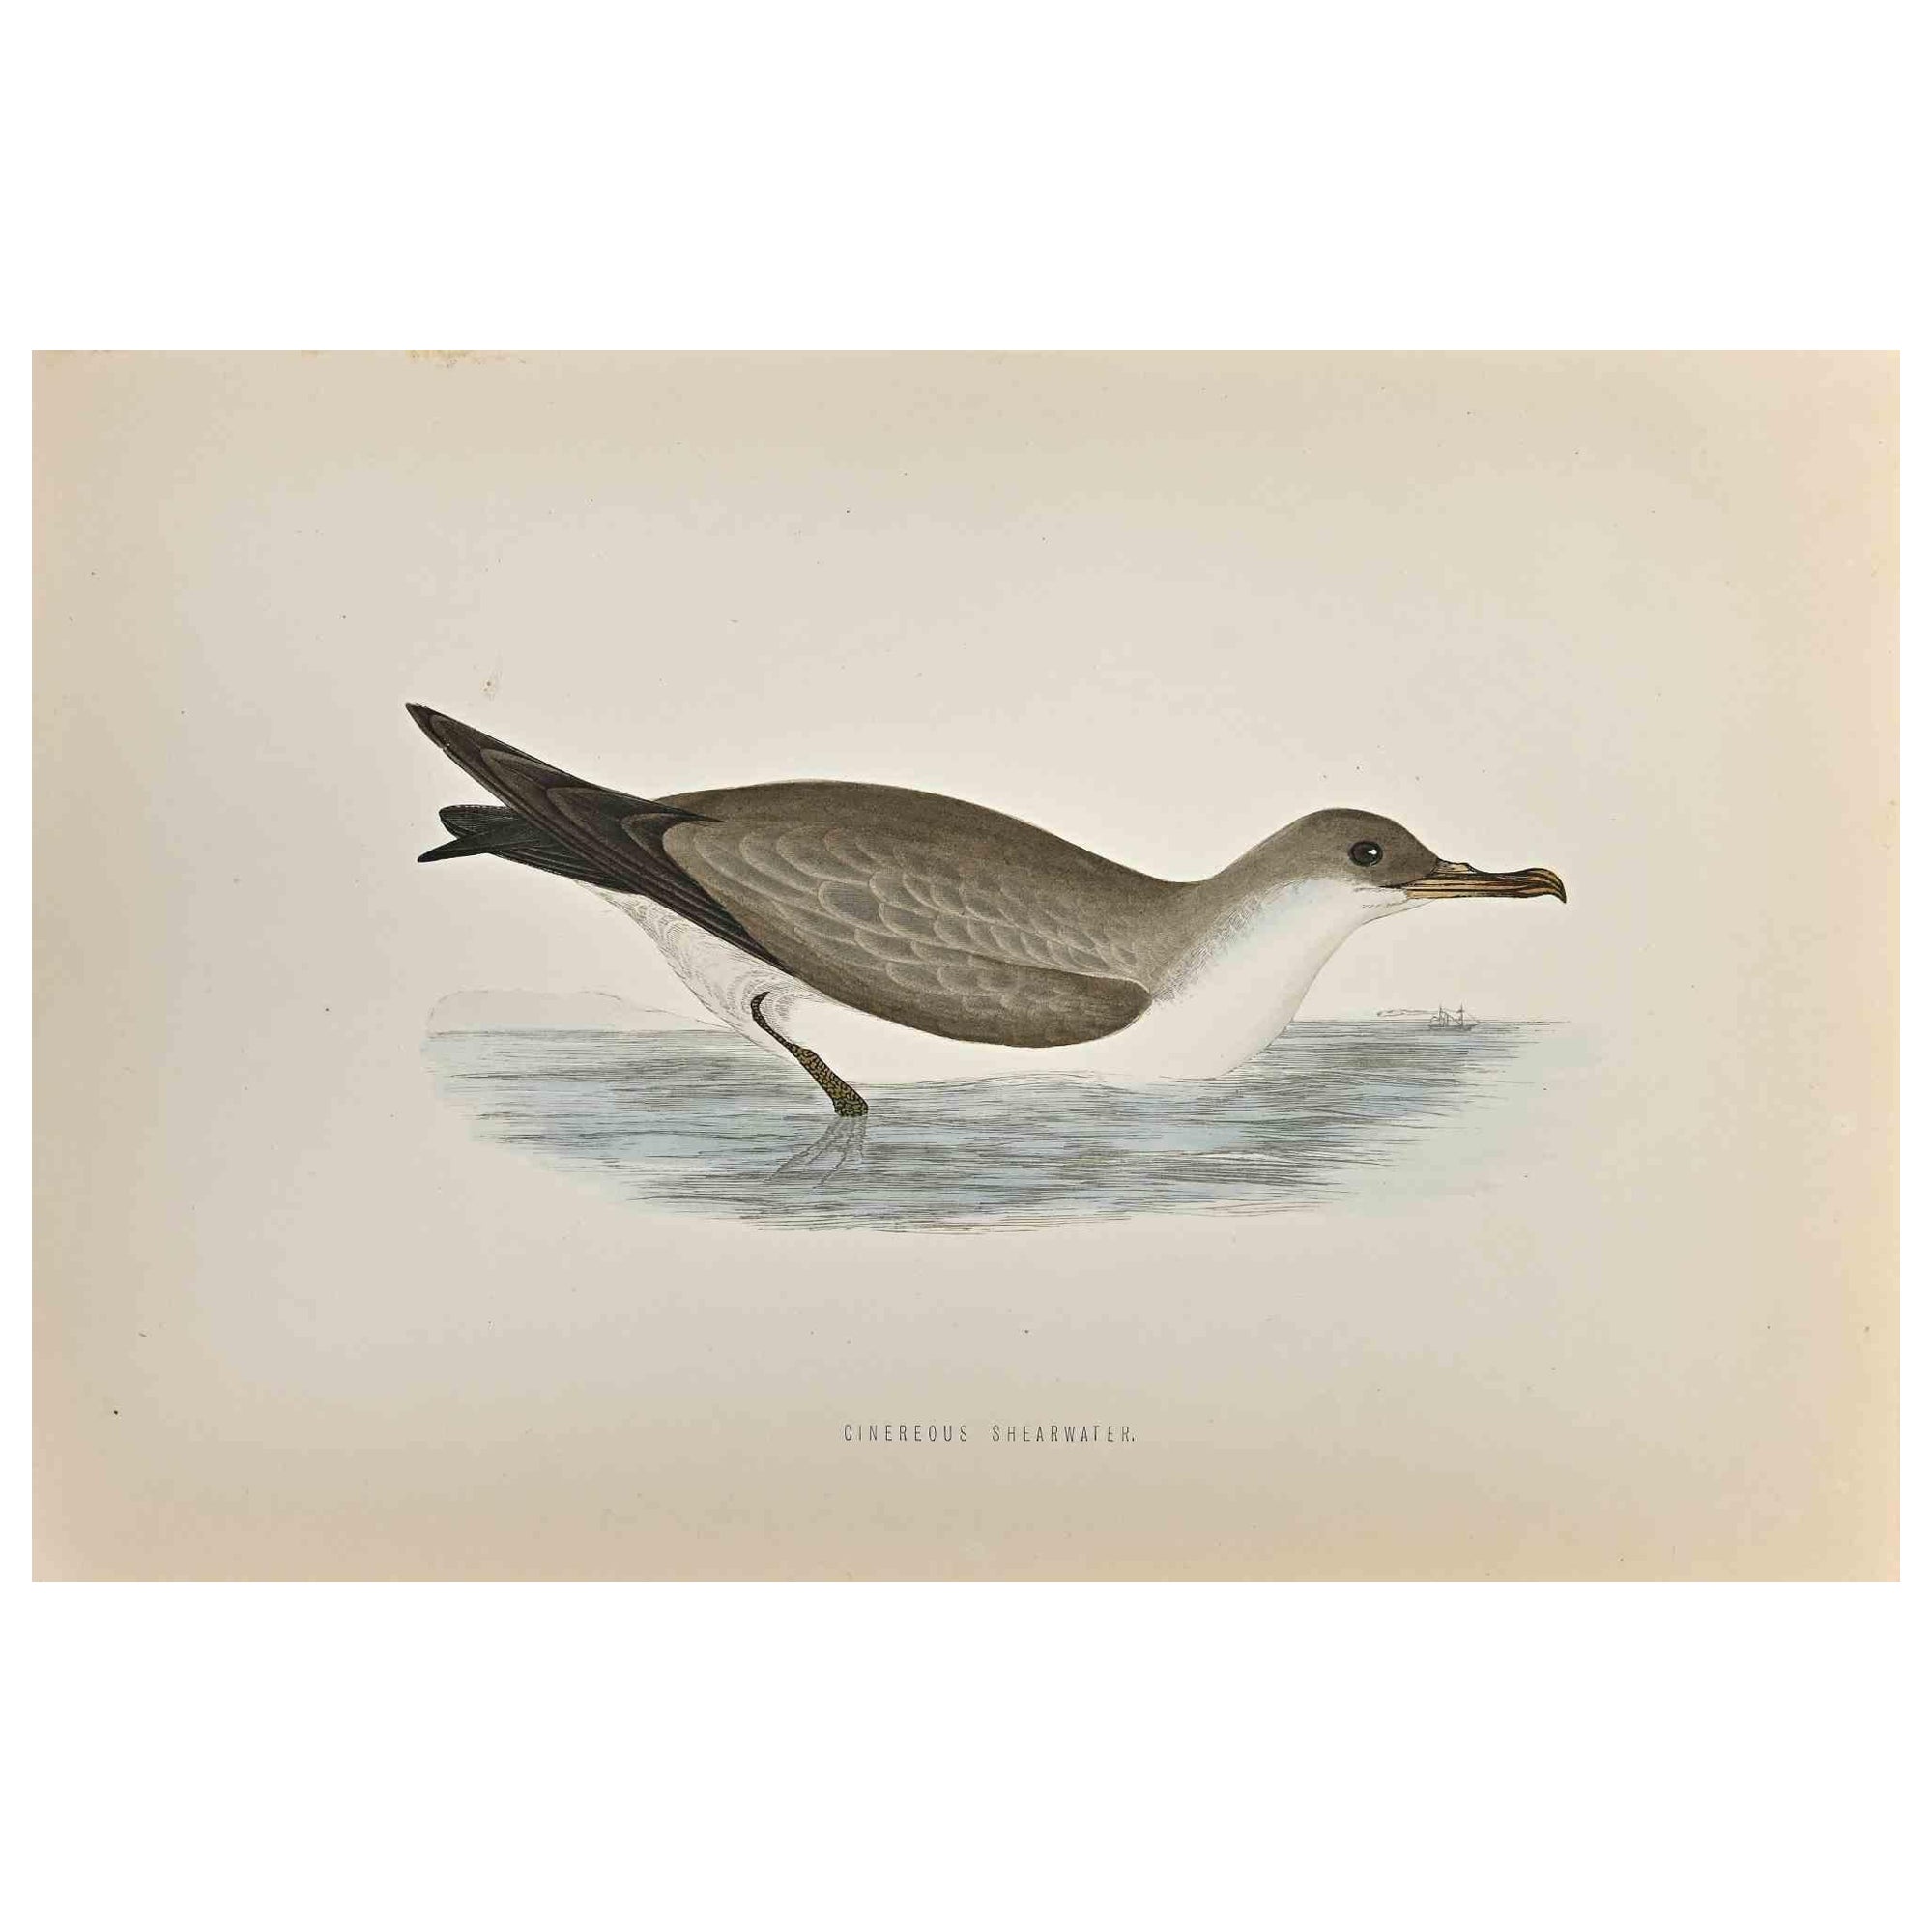 Cinereous Shearwater is a modern artwork realized in 1870 by the British artist Alexander Francis Lydon (1836-1917) . 

Woodcut print, hand colored, published by London, Bell & Sons, 1870.  Name of the bird printed in plate. This work is part of a